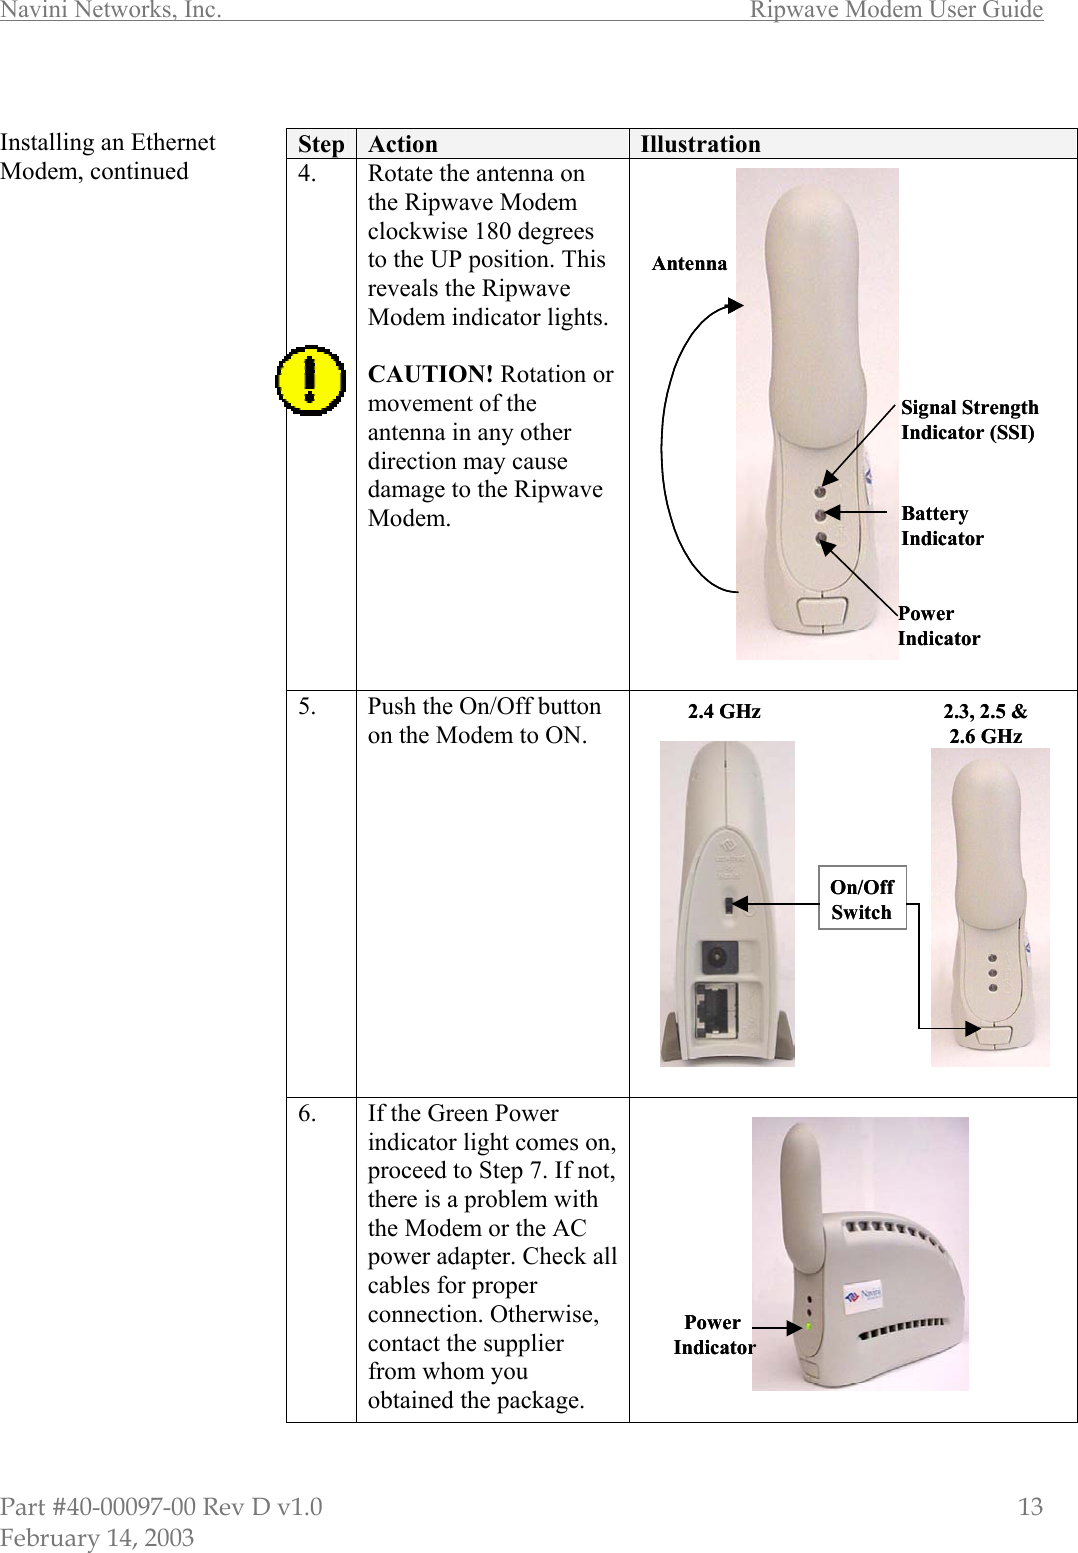 Navini Networks, Inc.        Ripwave Modem User Guide Part #40-00097-00 Rev D v1.0                         13 February 14, 2003  Installing an Ethernet Modem, continued                                             Step  Action  Illustration 4.  Rotate the antenna on the Ripwave Modem clockwise 180 degrees to the UP position. This reveals the Ripwave Modem indicator lights.  CAUTION! Rotation or movement of the antenna in any other direction may cause damage to the Ripwave Modem.  5.  Push the On/Off button on the Modem to ON.  6.  If the Green Power indicator light comes on, proceed to Step 7. If not, there is a problem with the Modem or the AC power adapter. Check all cables for proper connection. Otherwise, contact the supplier from whom you obtained the package.   Signal Strength Indicator (SSI)Power IndicatorBattery IndicatorAntennaSignal Strength Indicator (SSI)Power IndicatorBattery IndicatorAntennaOn/Off Switch2.4 GHz  2.3, 2.5 &amp;2.6 GHz On/Off Switch2.4 GHz  2.3, 2.5 &amp;2.6 GHz PowerIndicatorPowerIndicator